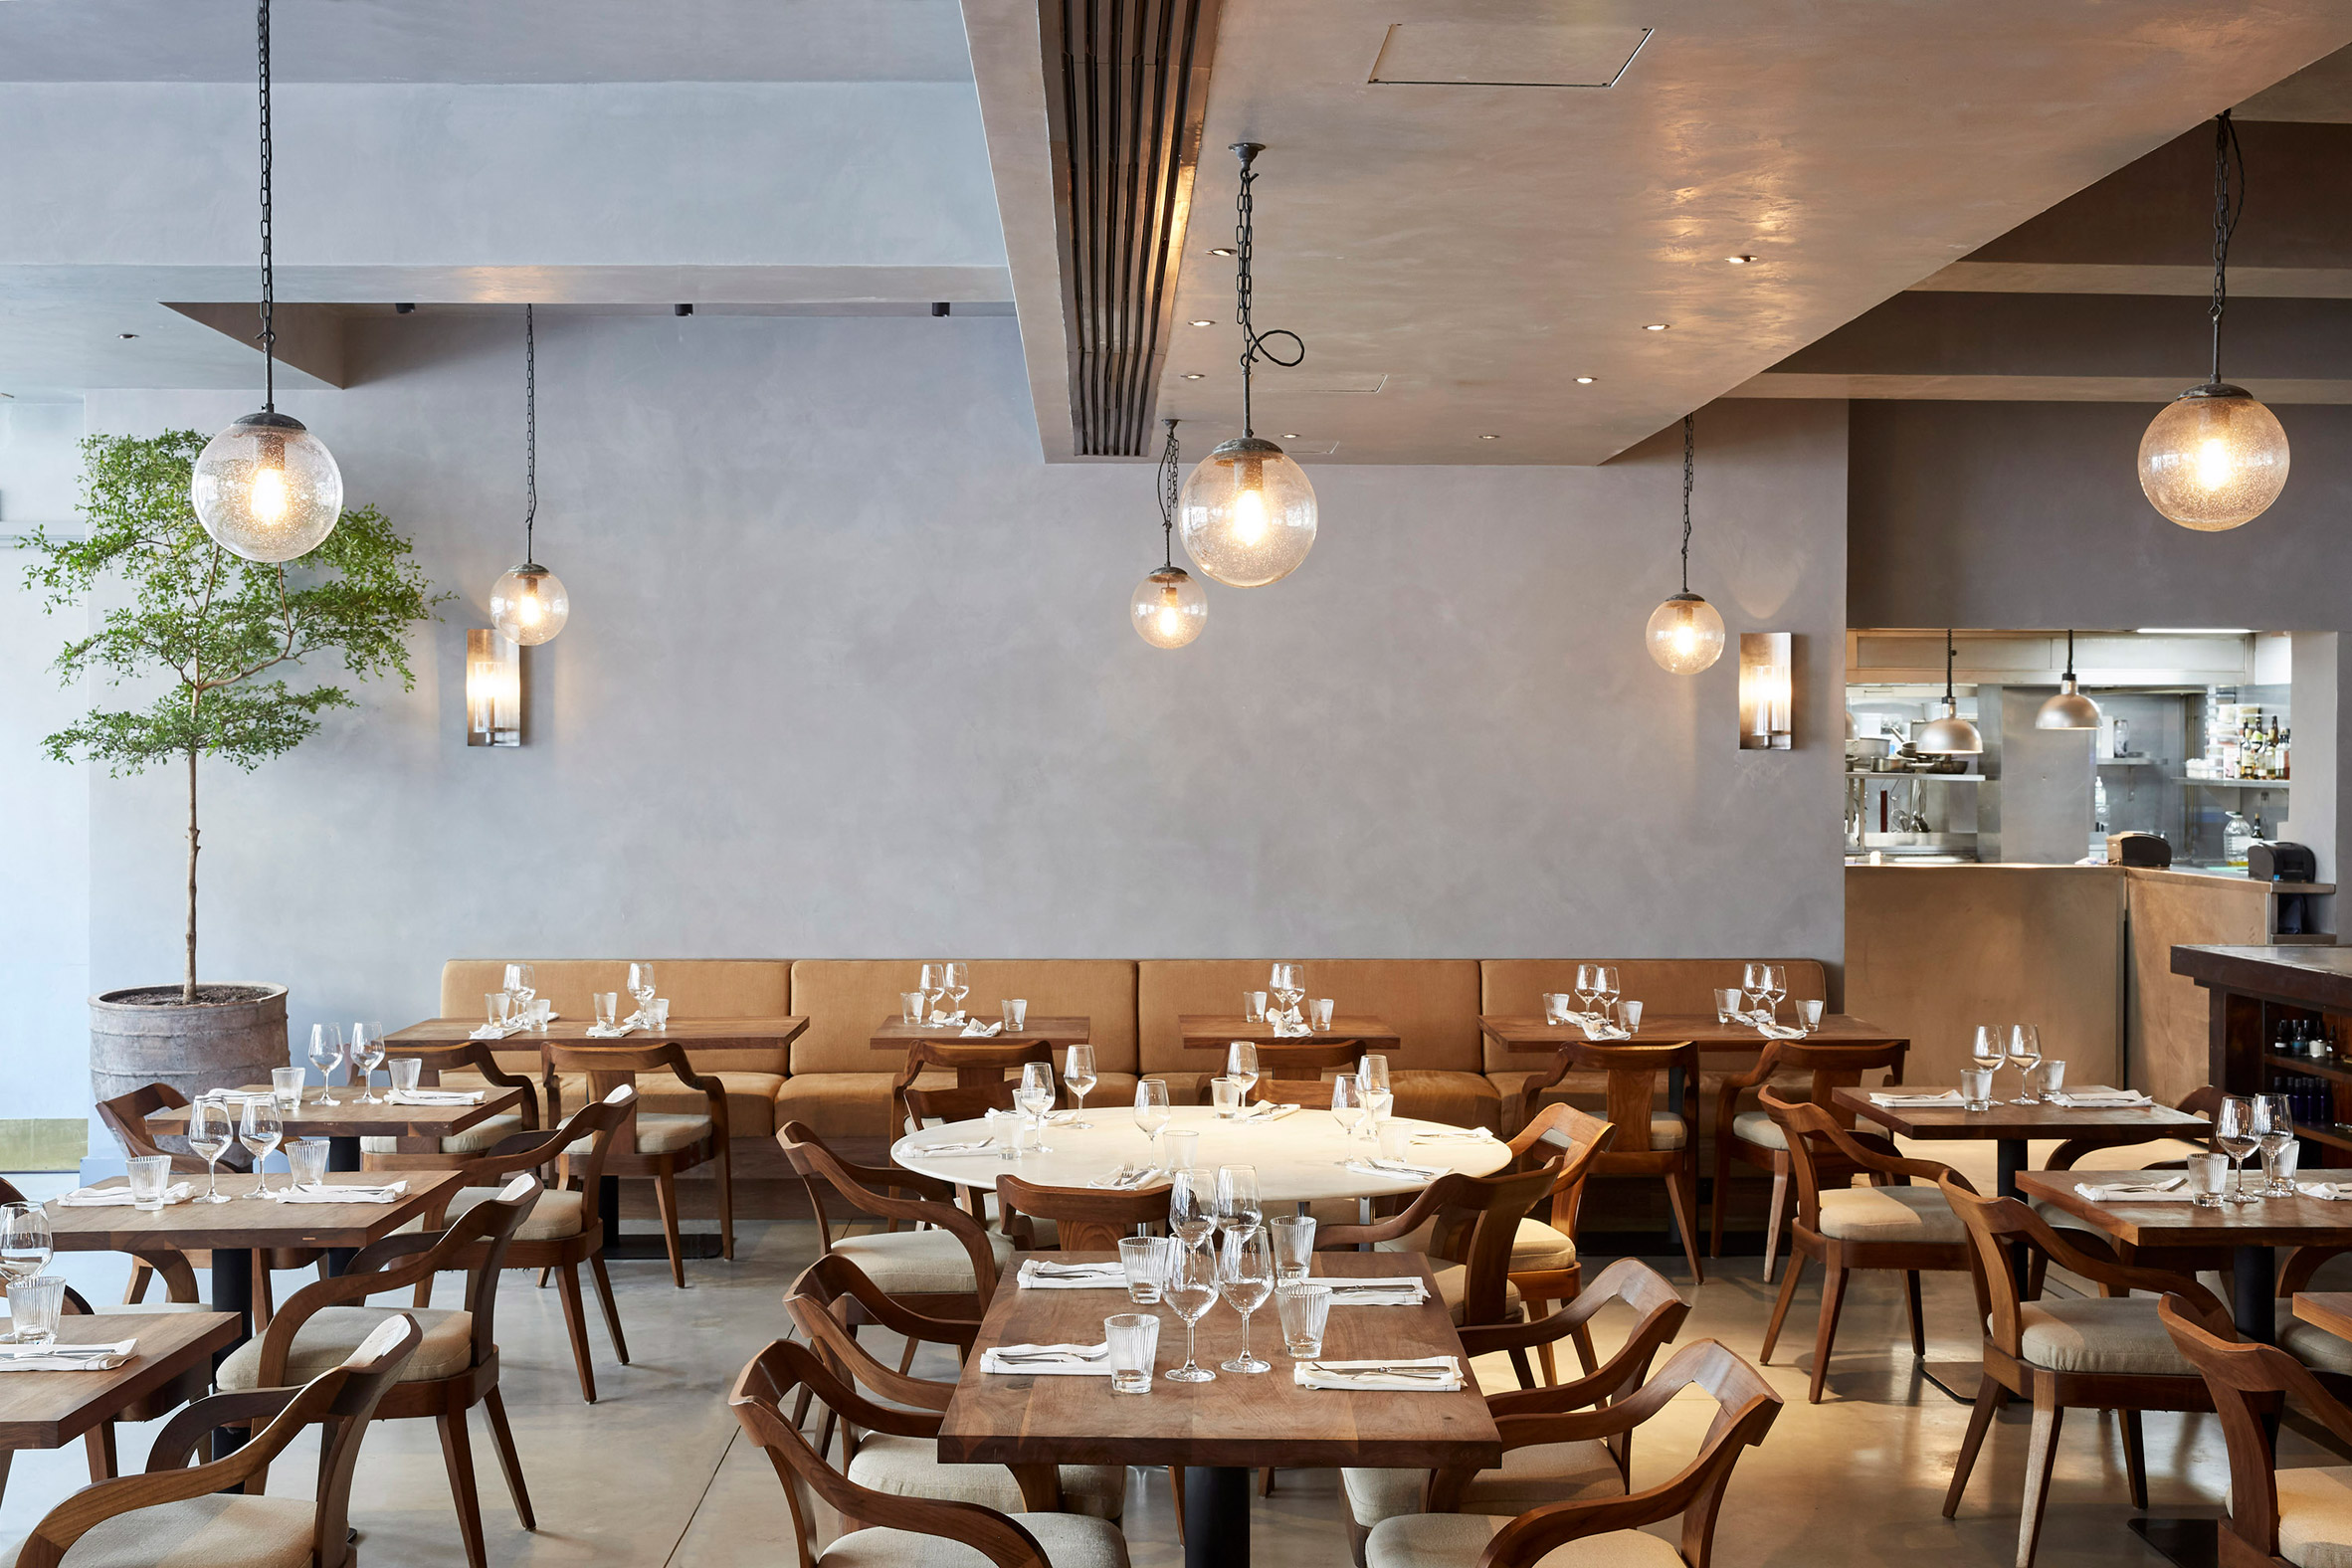 Timber furnishings and open-fire cooking warm up concrete interiors of St Leonards restaurant